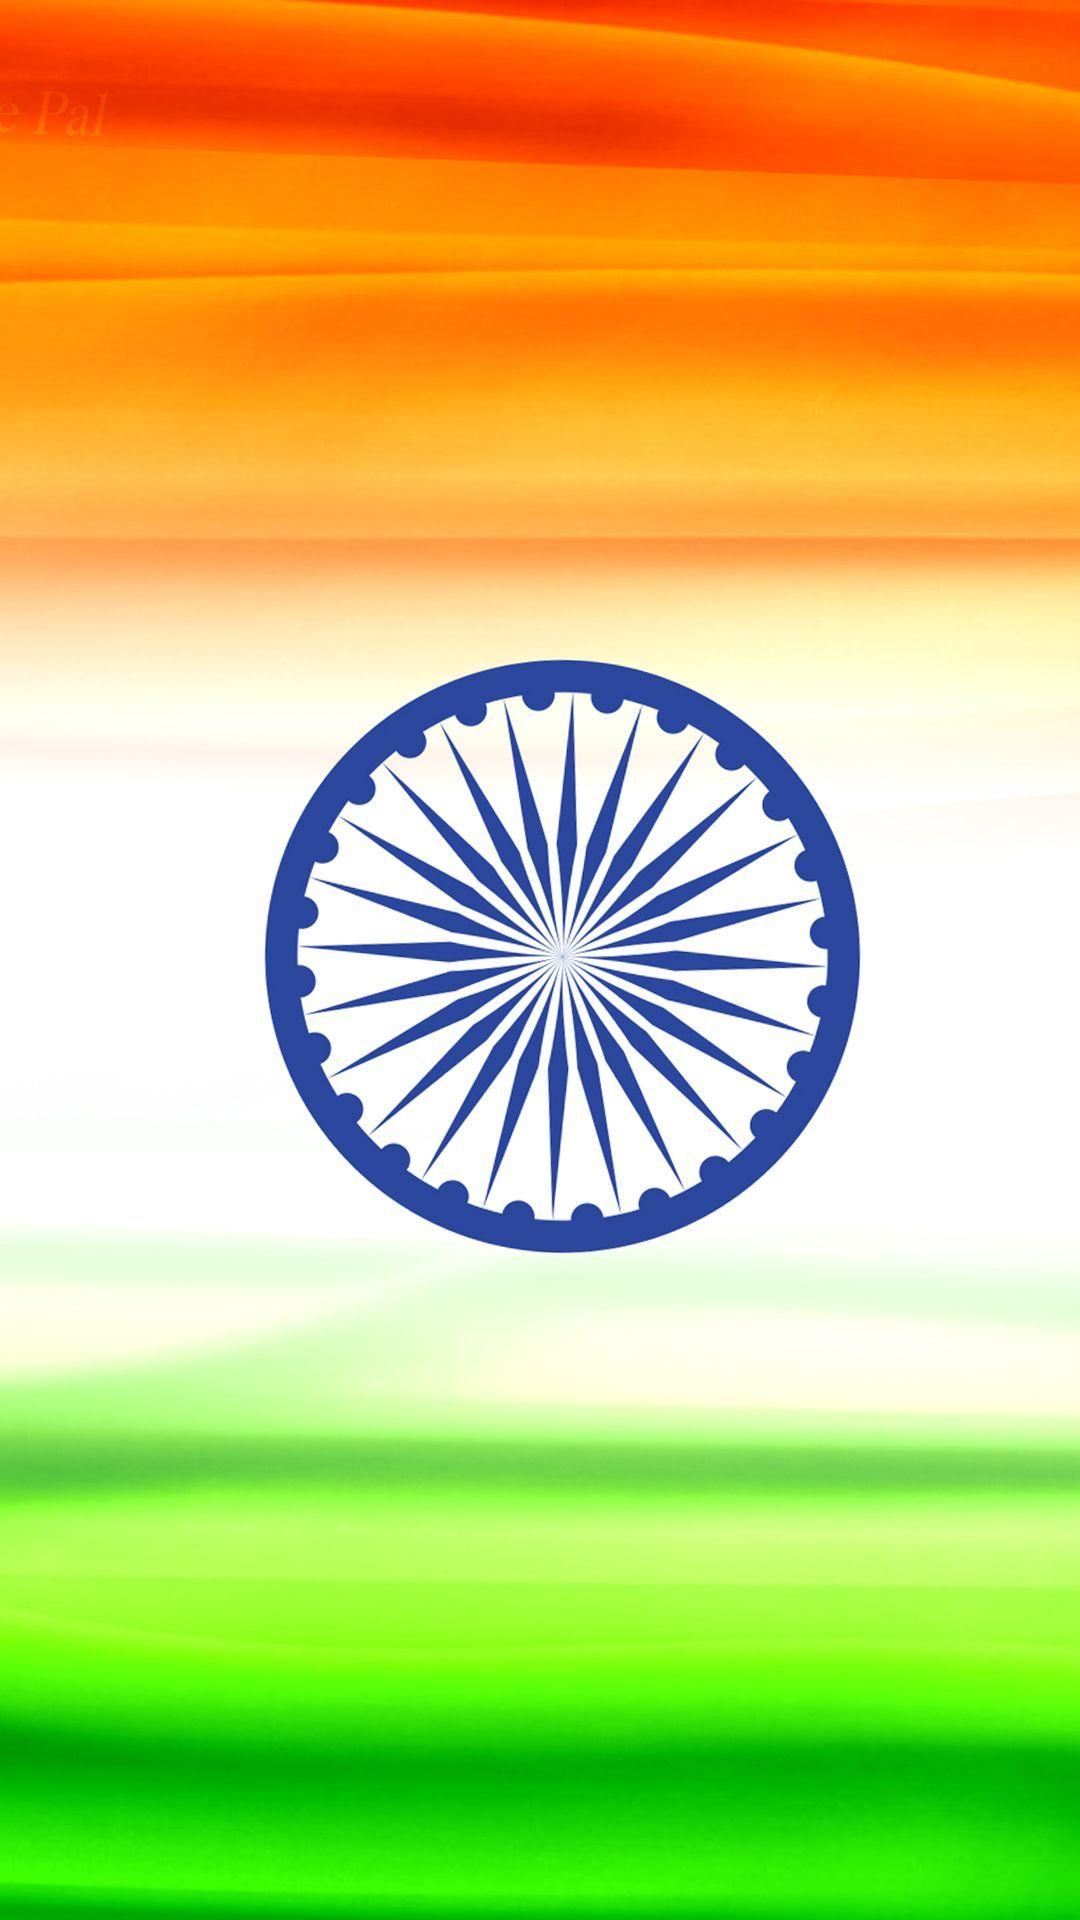 India Flag for Mobile Phone Wallpaper 10 of 17 to be an